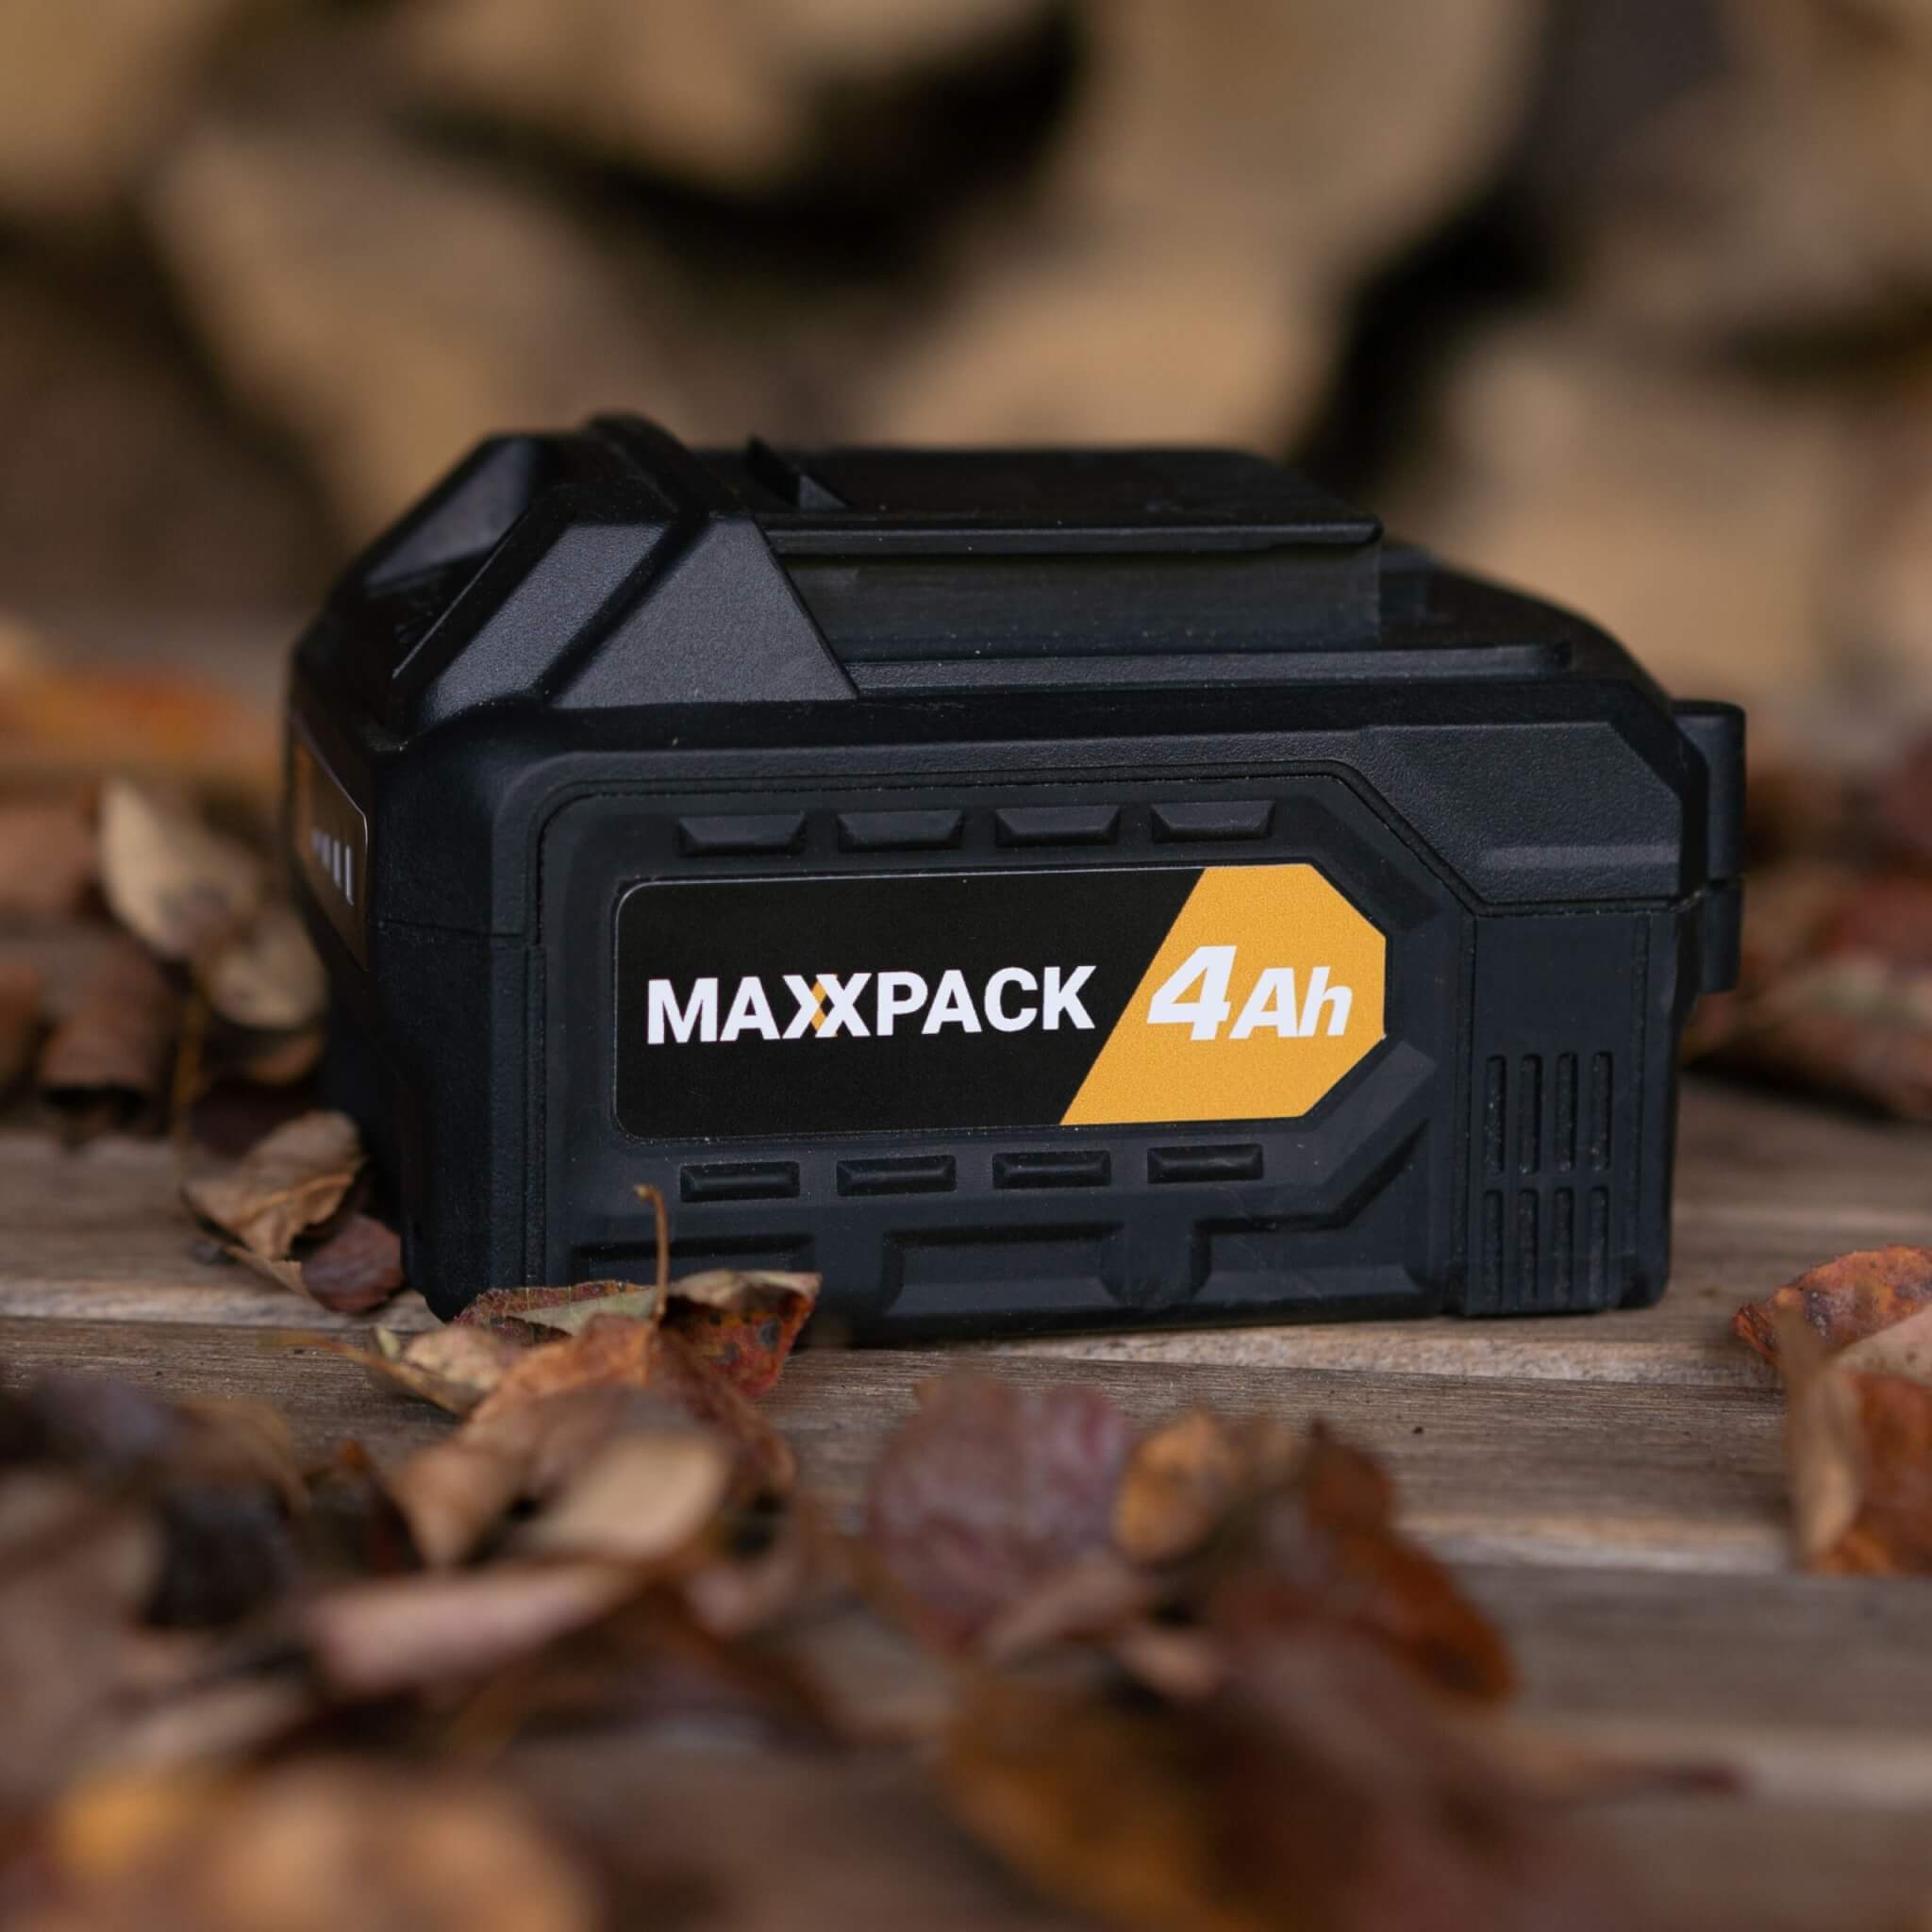 4.0Ah Battery for power and garden tools | 18V Maxxpack collection | Batavia